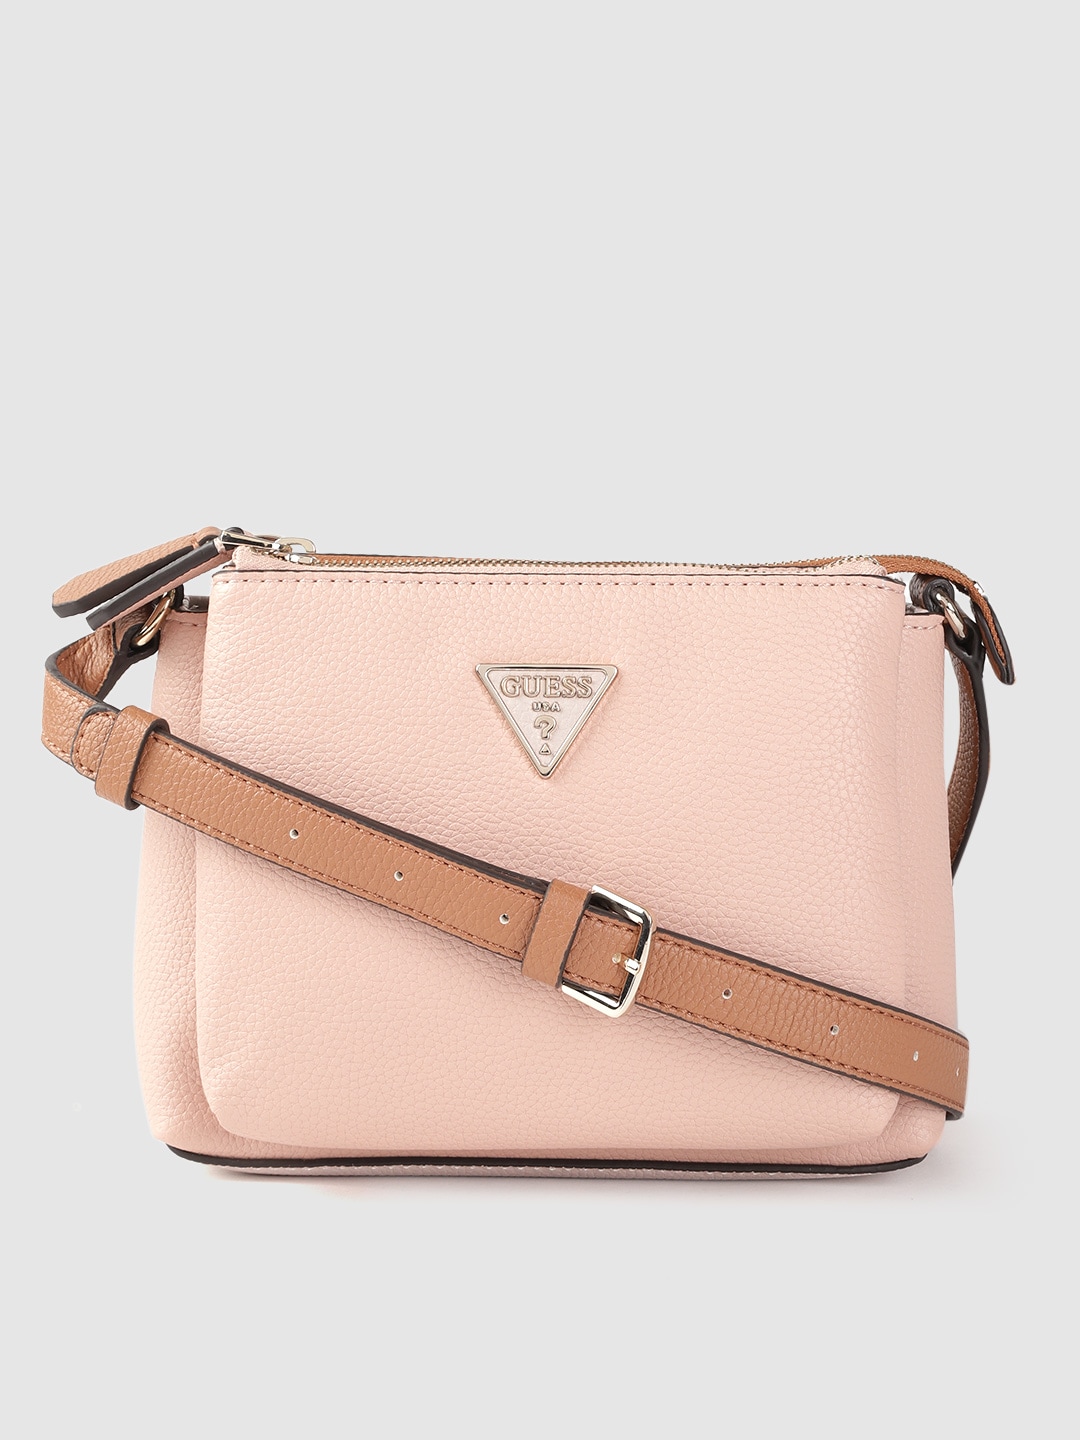 GUESS Pink & Brown Structured Sling Bag Price in India